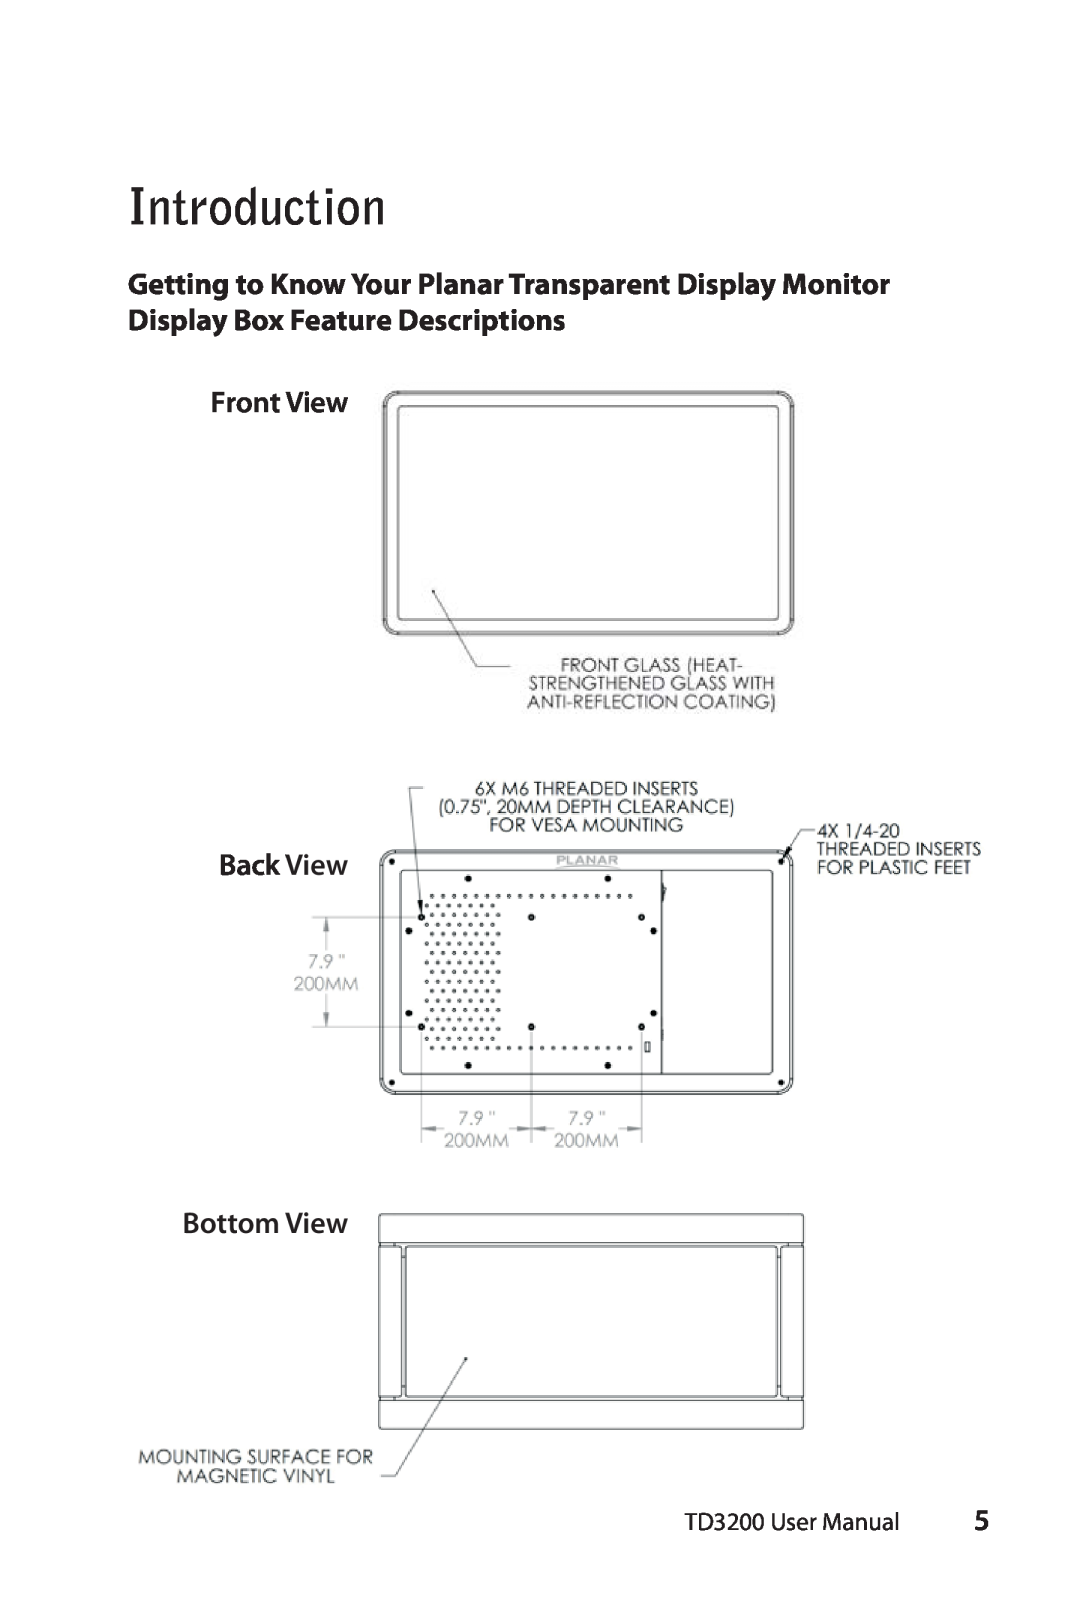 Planar TD3200 user manual Introduction, Front View Back View Bottom View 